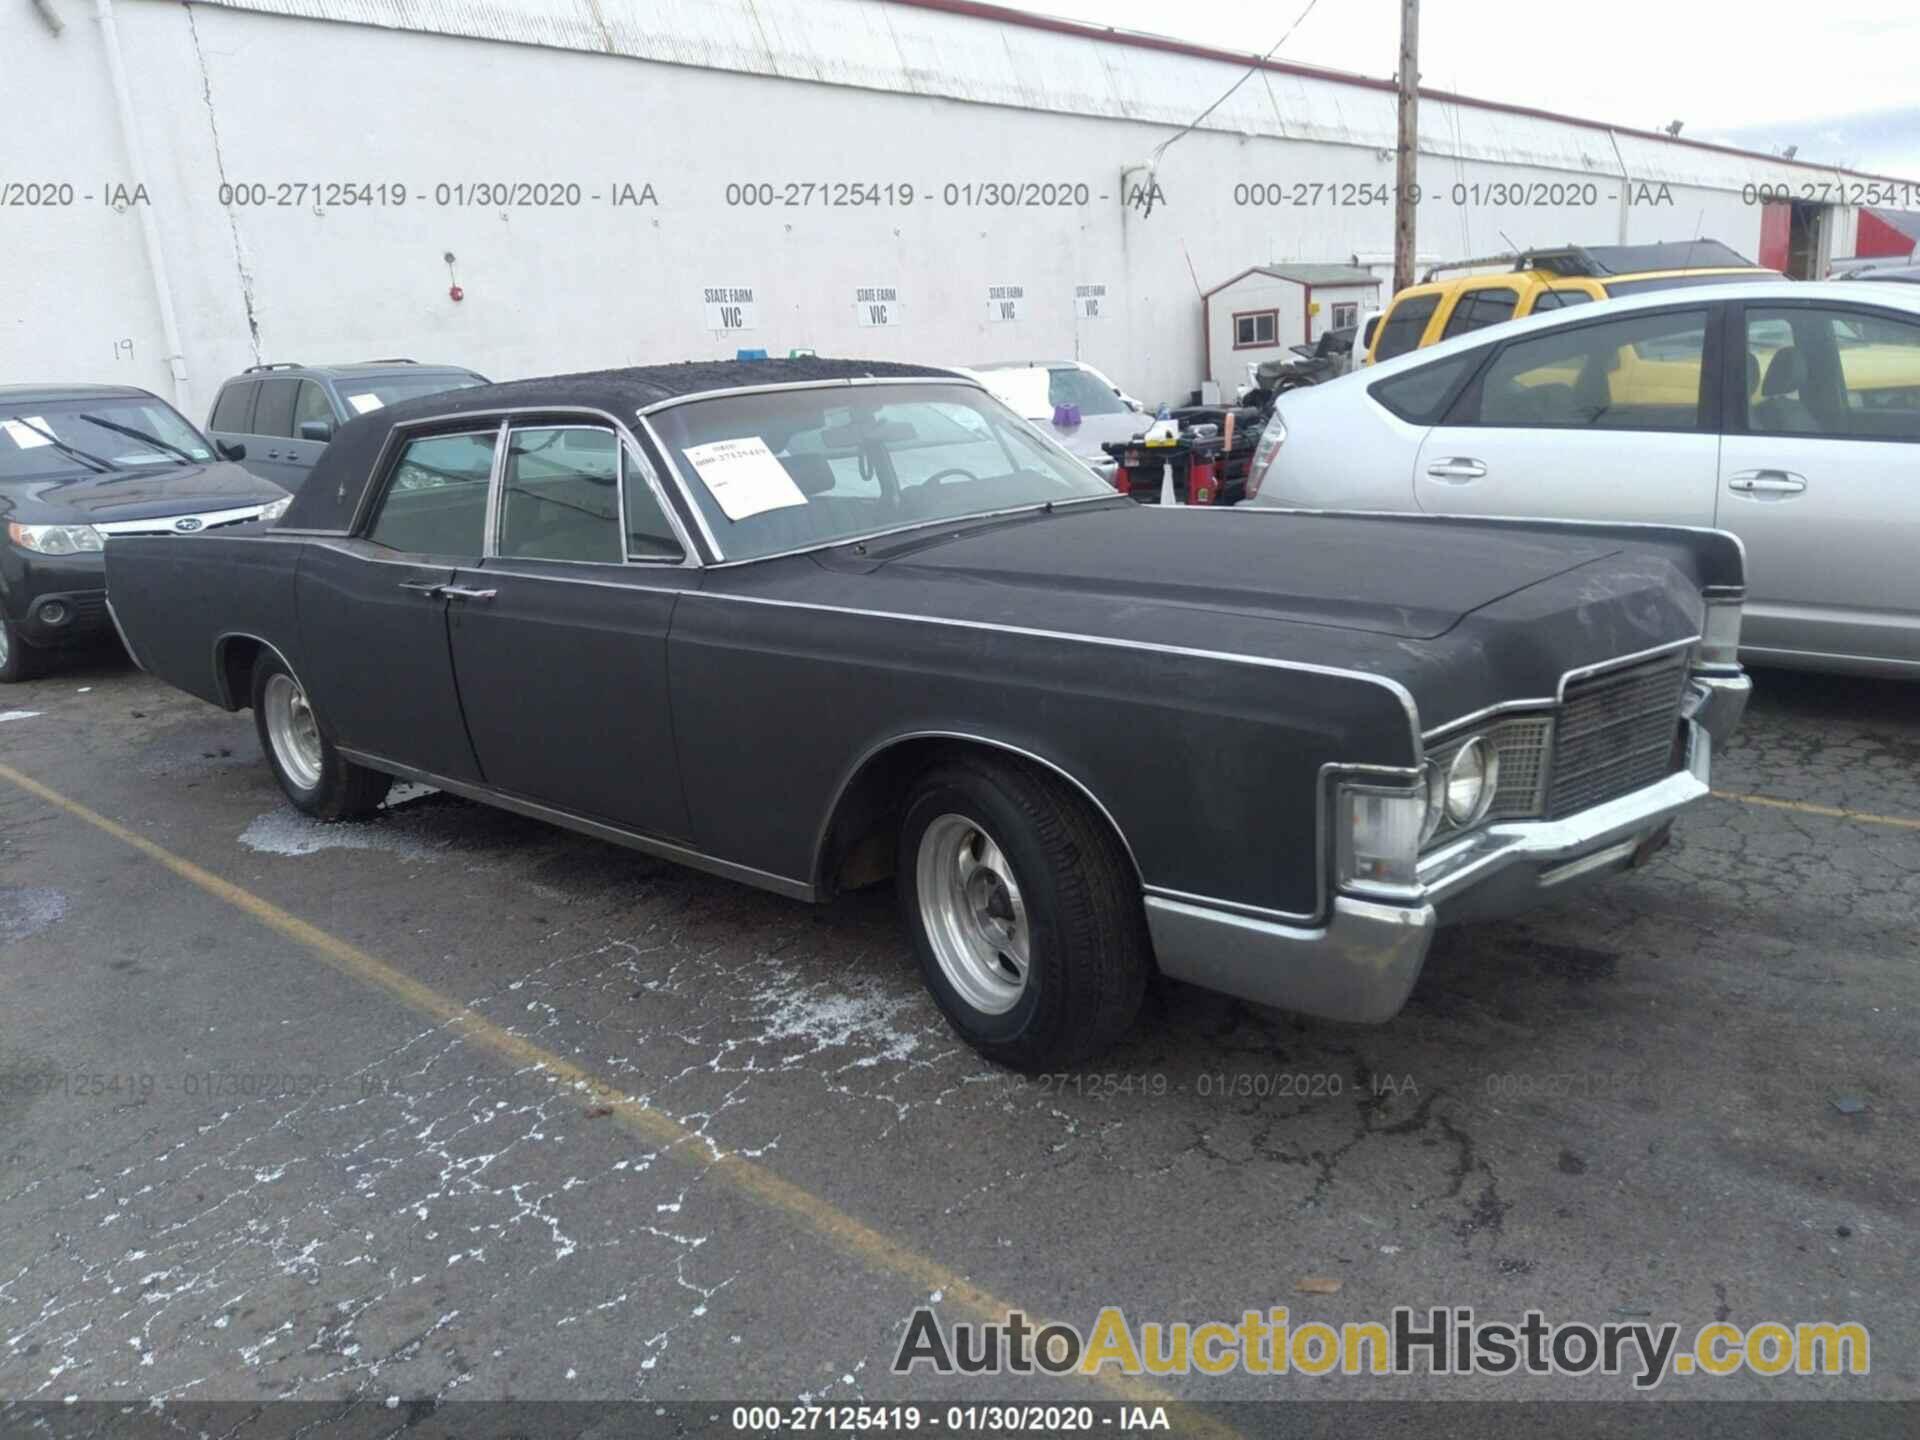 LINCOLN CONTINENTAL, 9Y82A888511